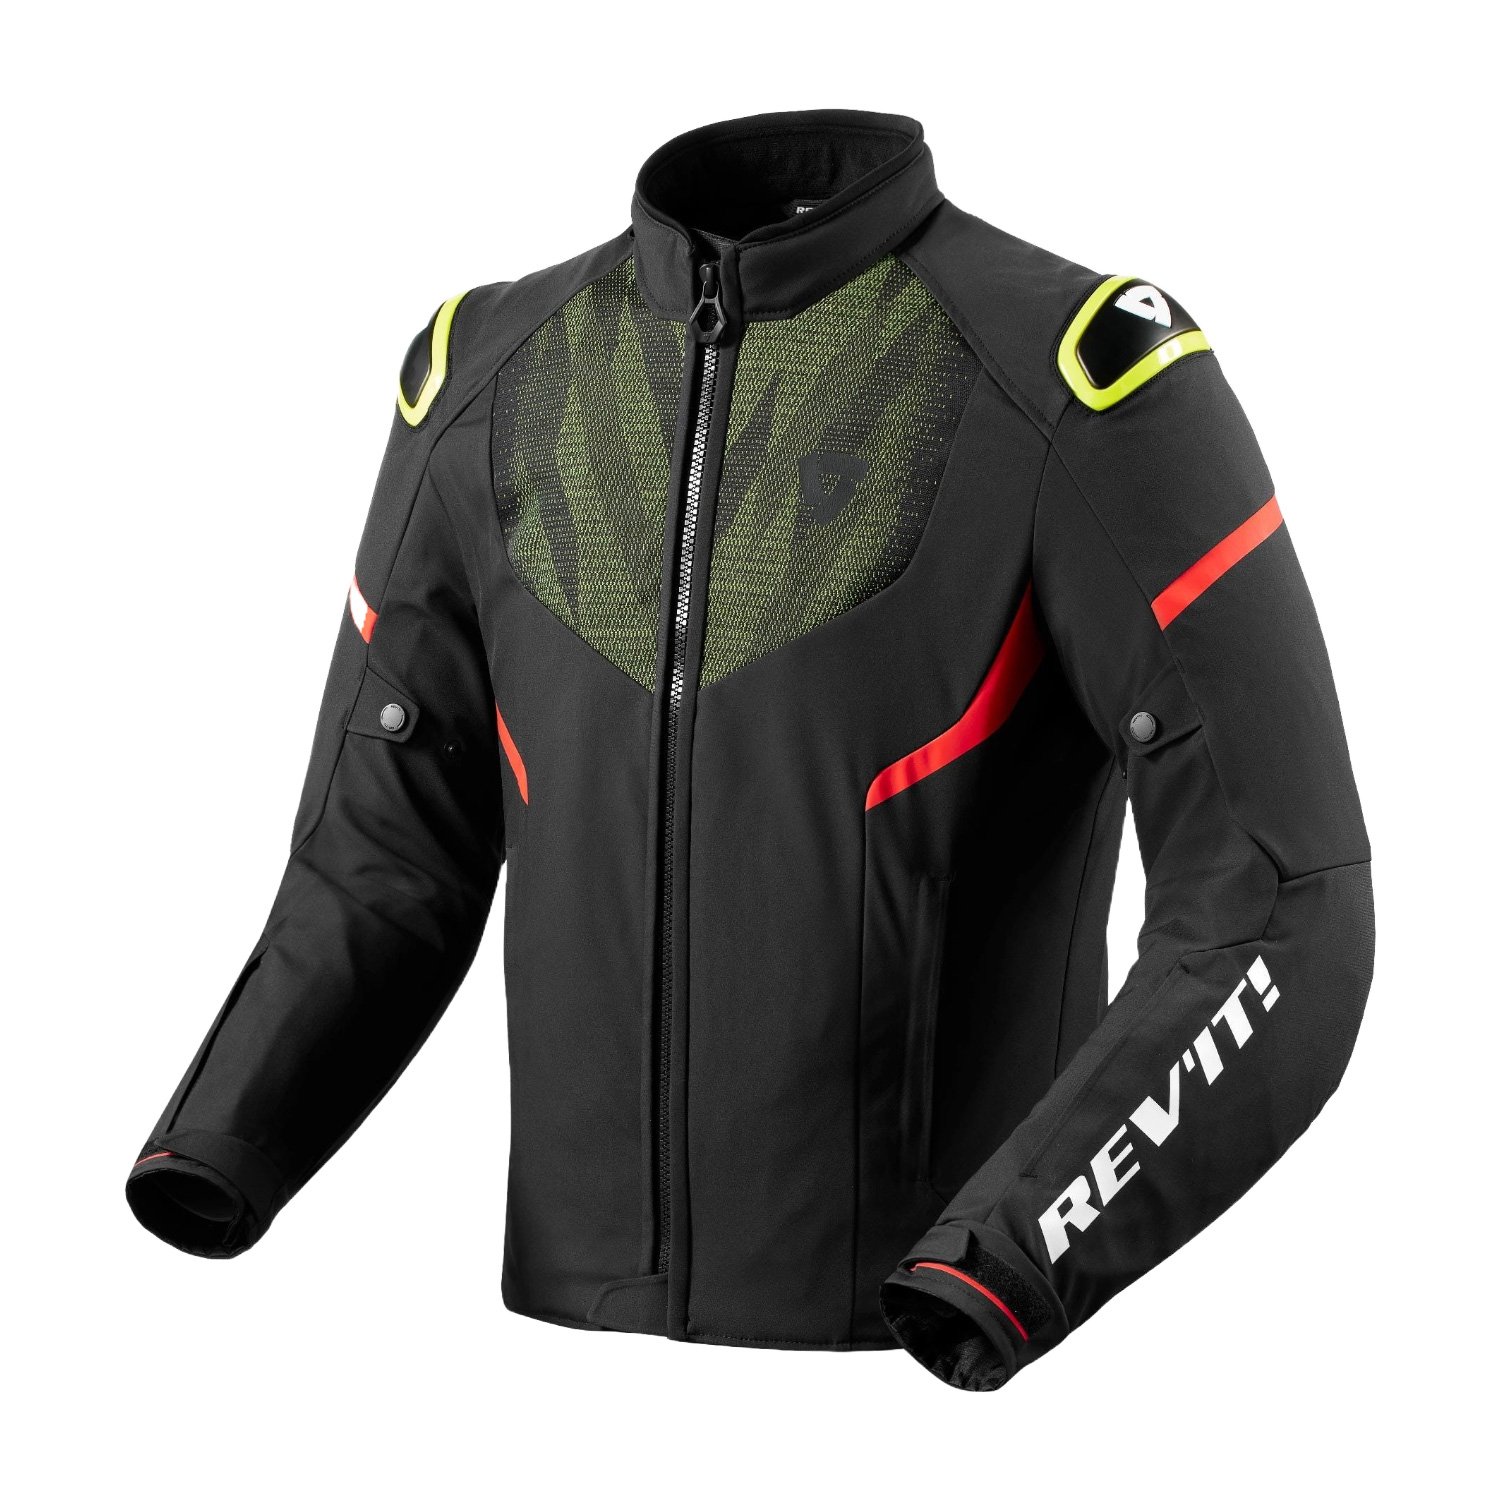 Image of REV'IT! Hyperspeed 2 H2O Jacket Black Neon Yellow Size L ID 8700001367363